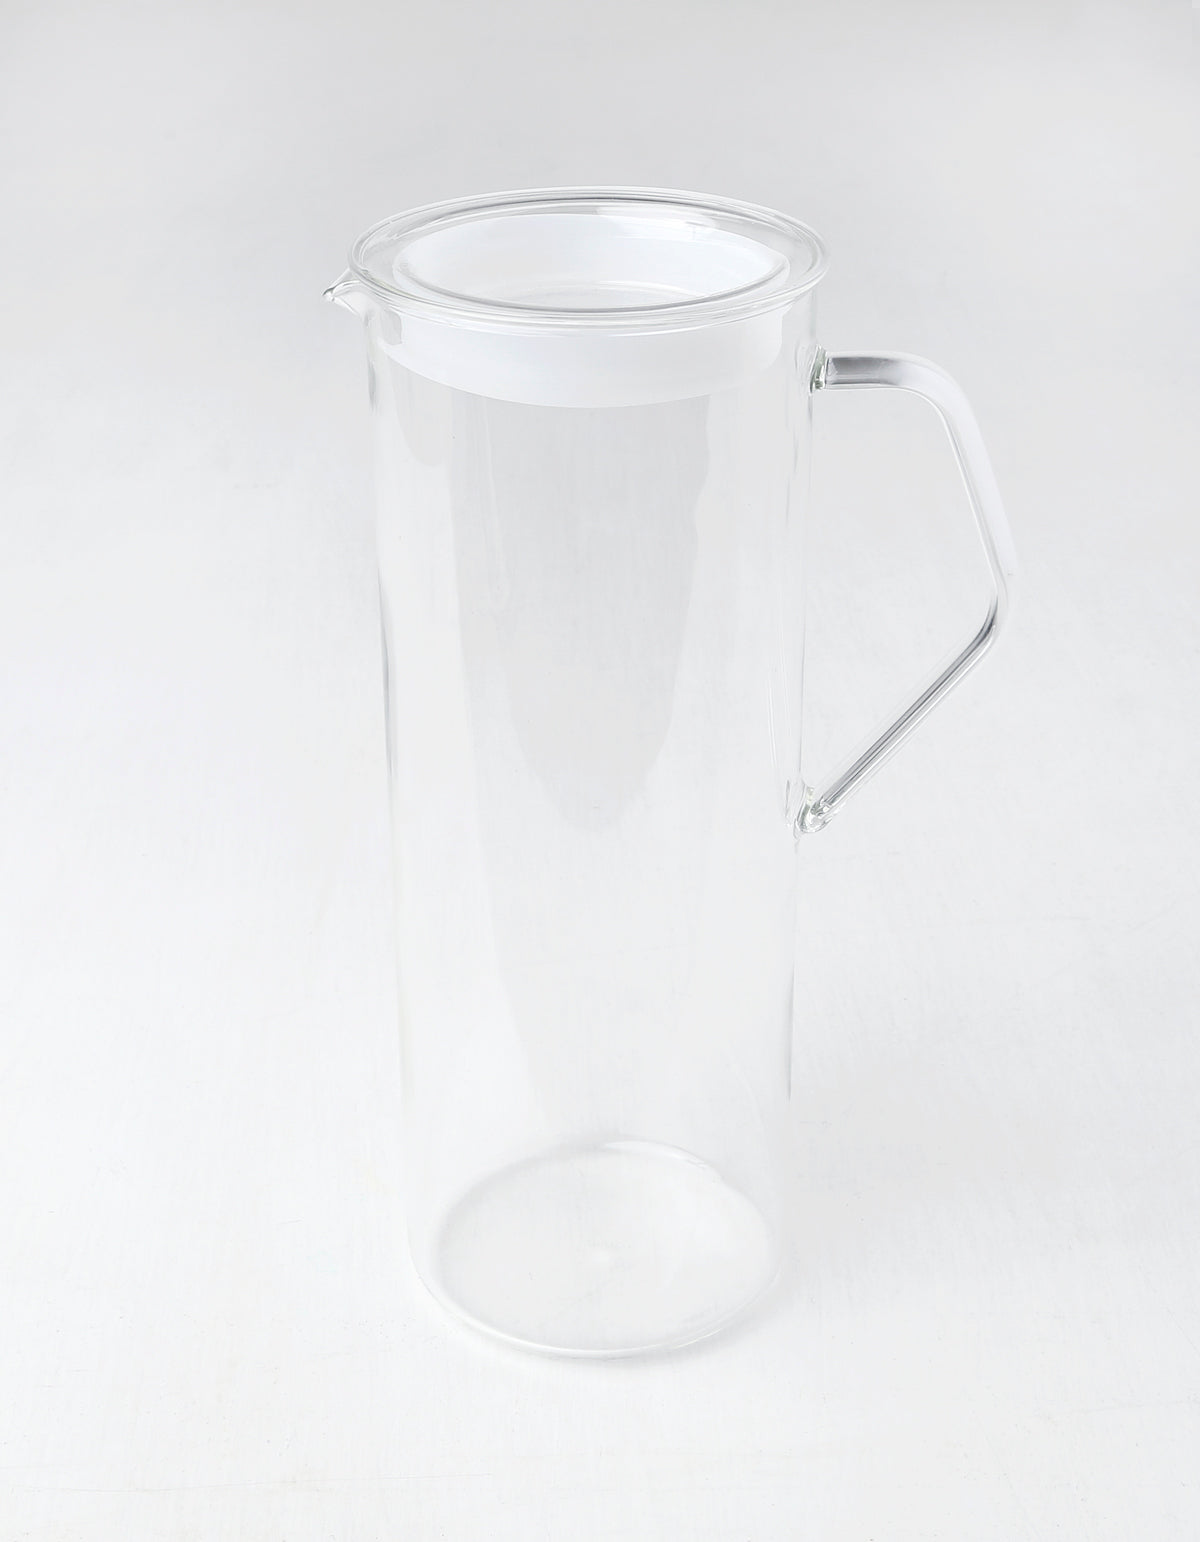 https://cdn.shopify.com/s/files/1/0290/4753/products/GLASS_WATER_JUG_HOME_OF_THE_BRAVE_WOLVES_WITHIN_01.jpg?v=1573672879